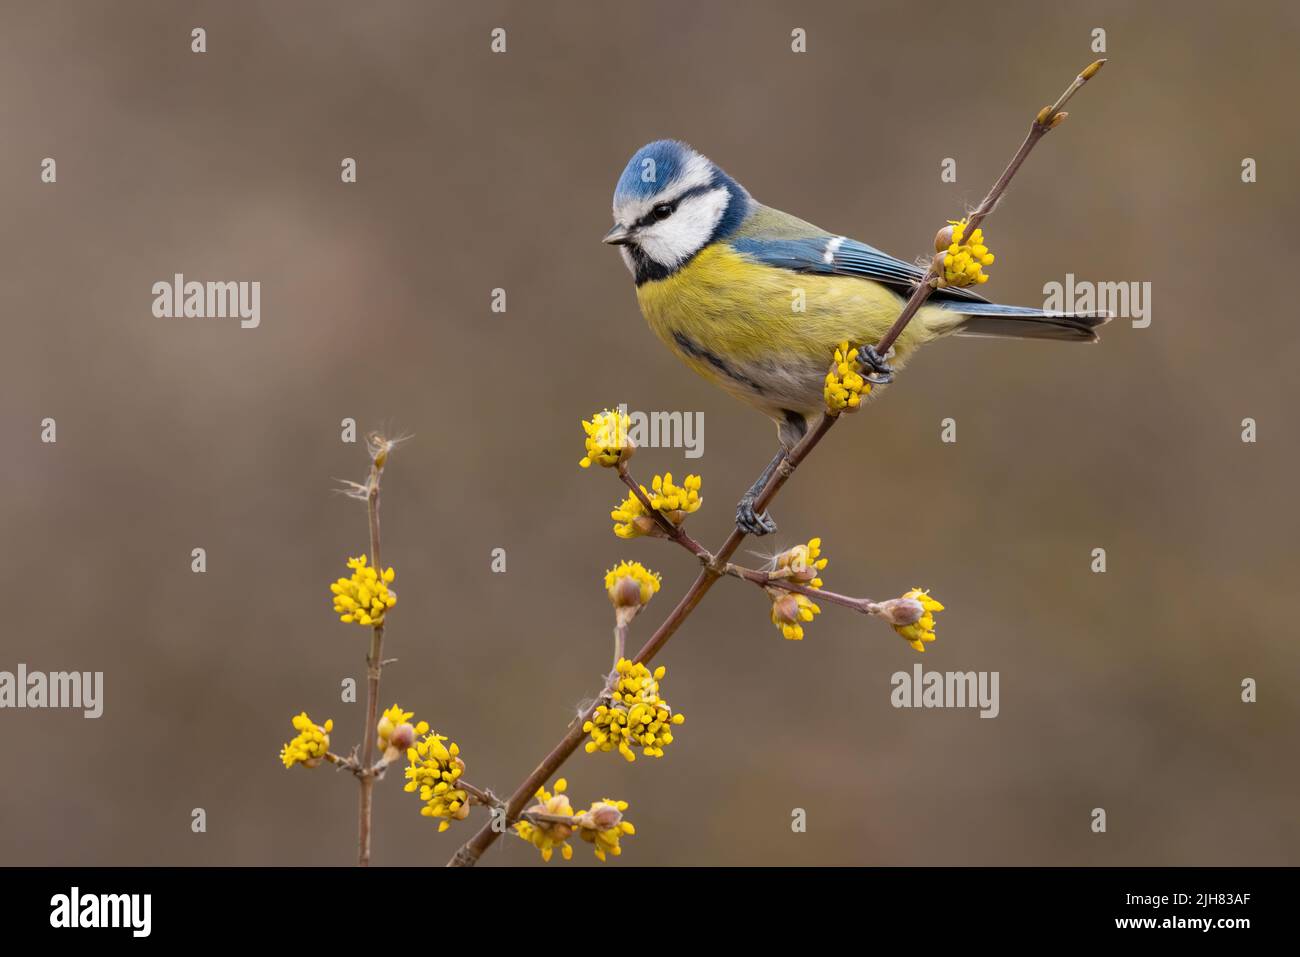 Eurasian blue tit sitting on twig in in spring nature Stock Photo